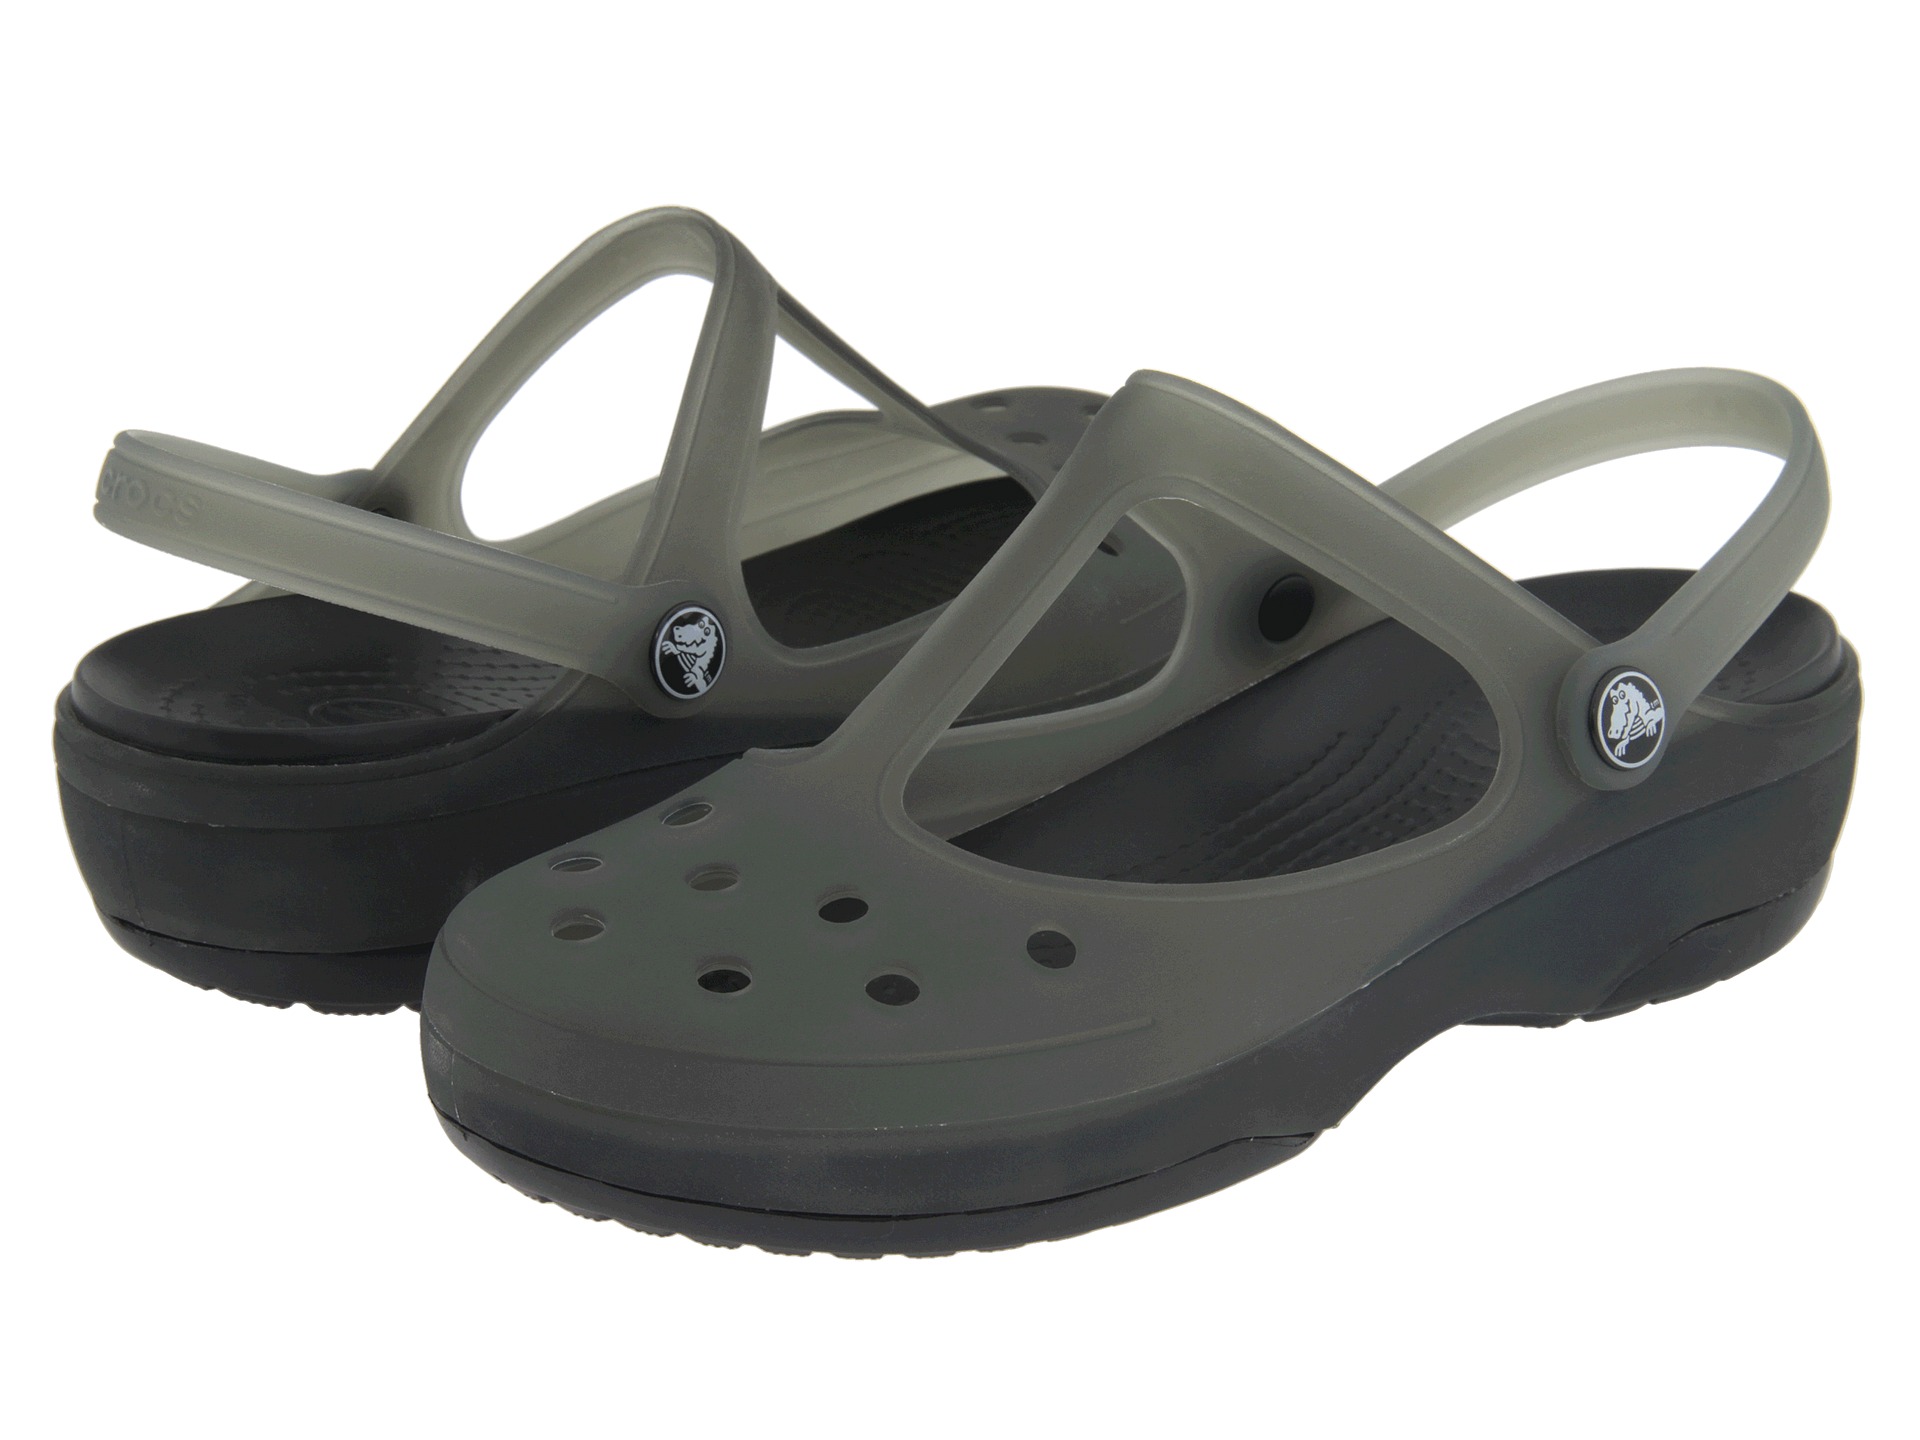 Crocs Carlie Mary Jane, Shoes | Shipped Free at Zappos